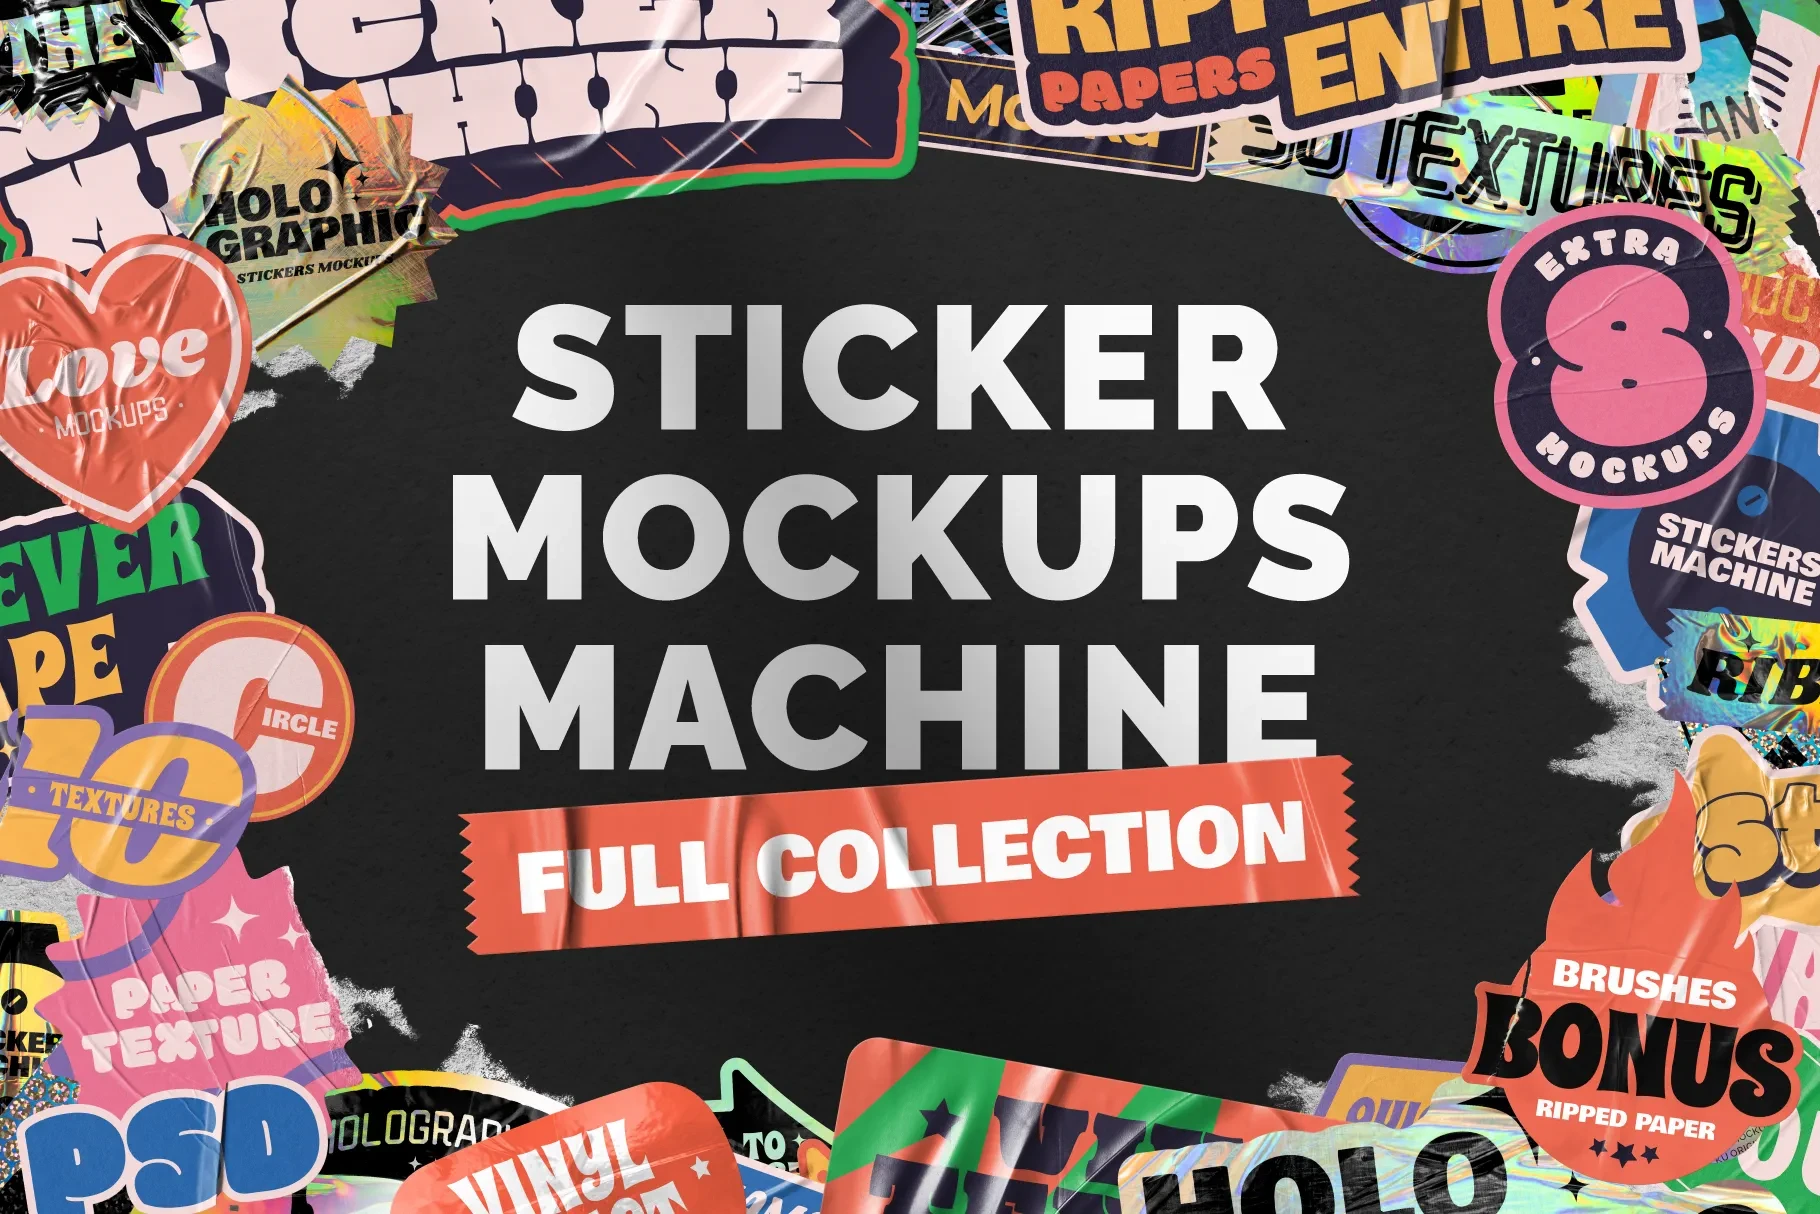 The Sticker Mockup Machine | Full Collectionthumbnaile